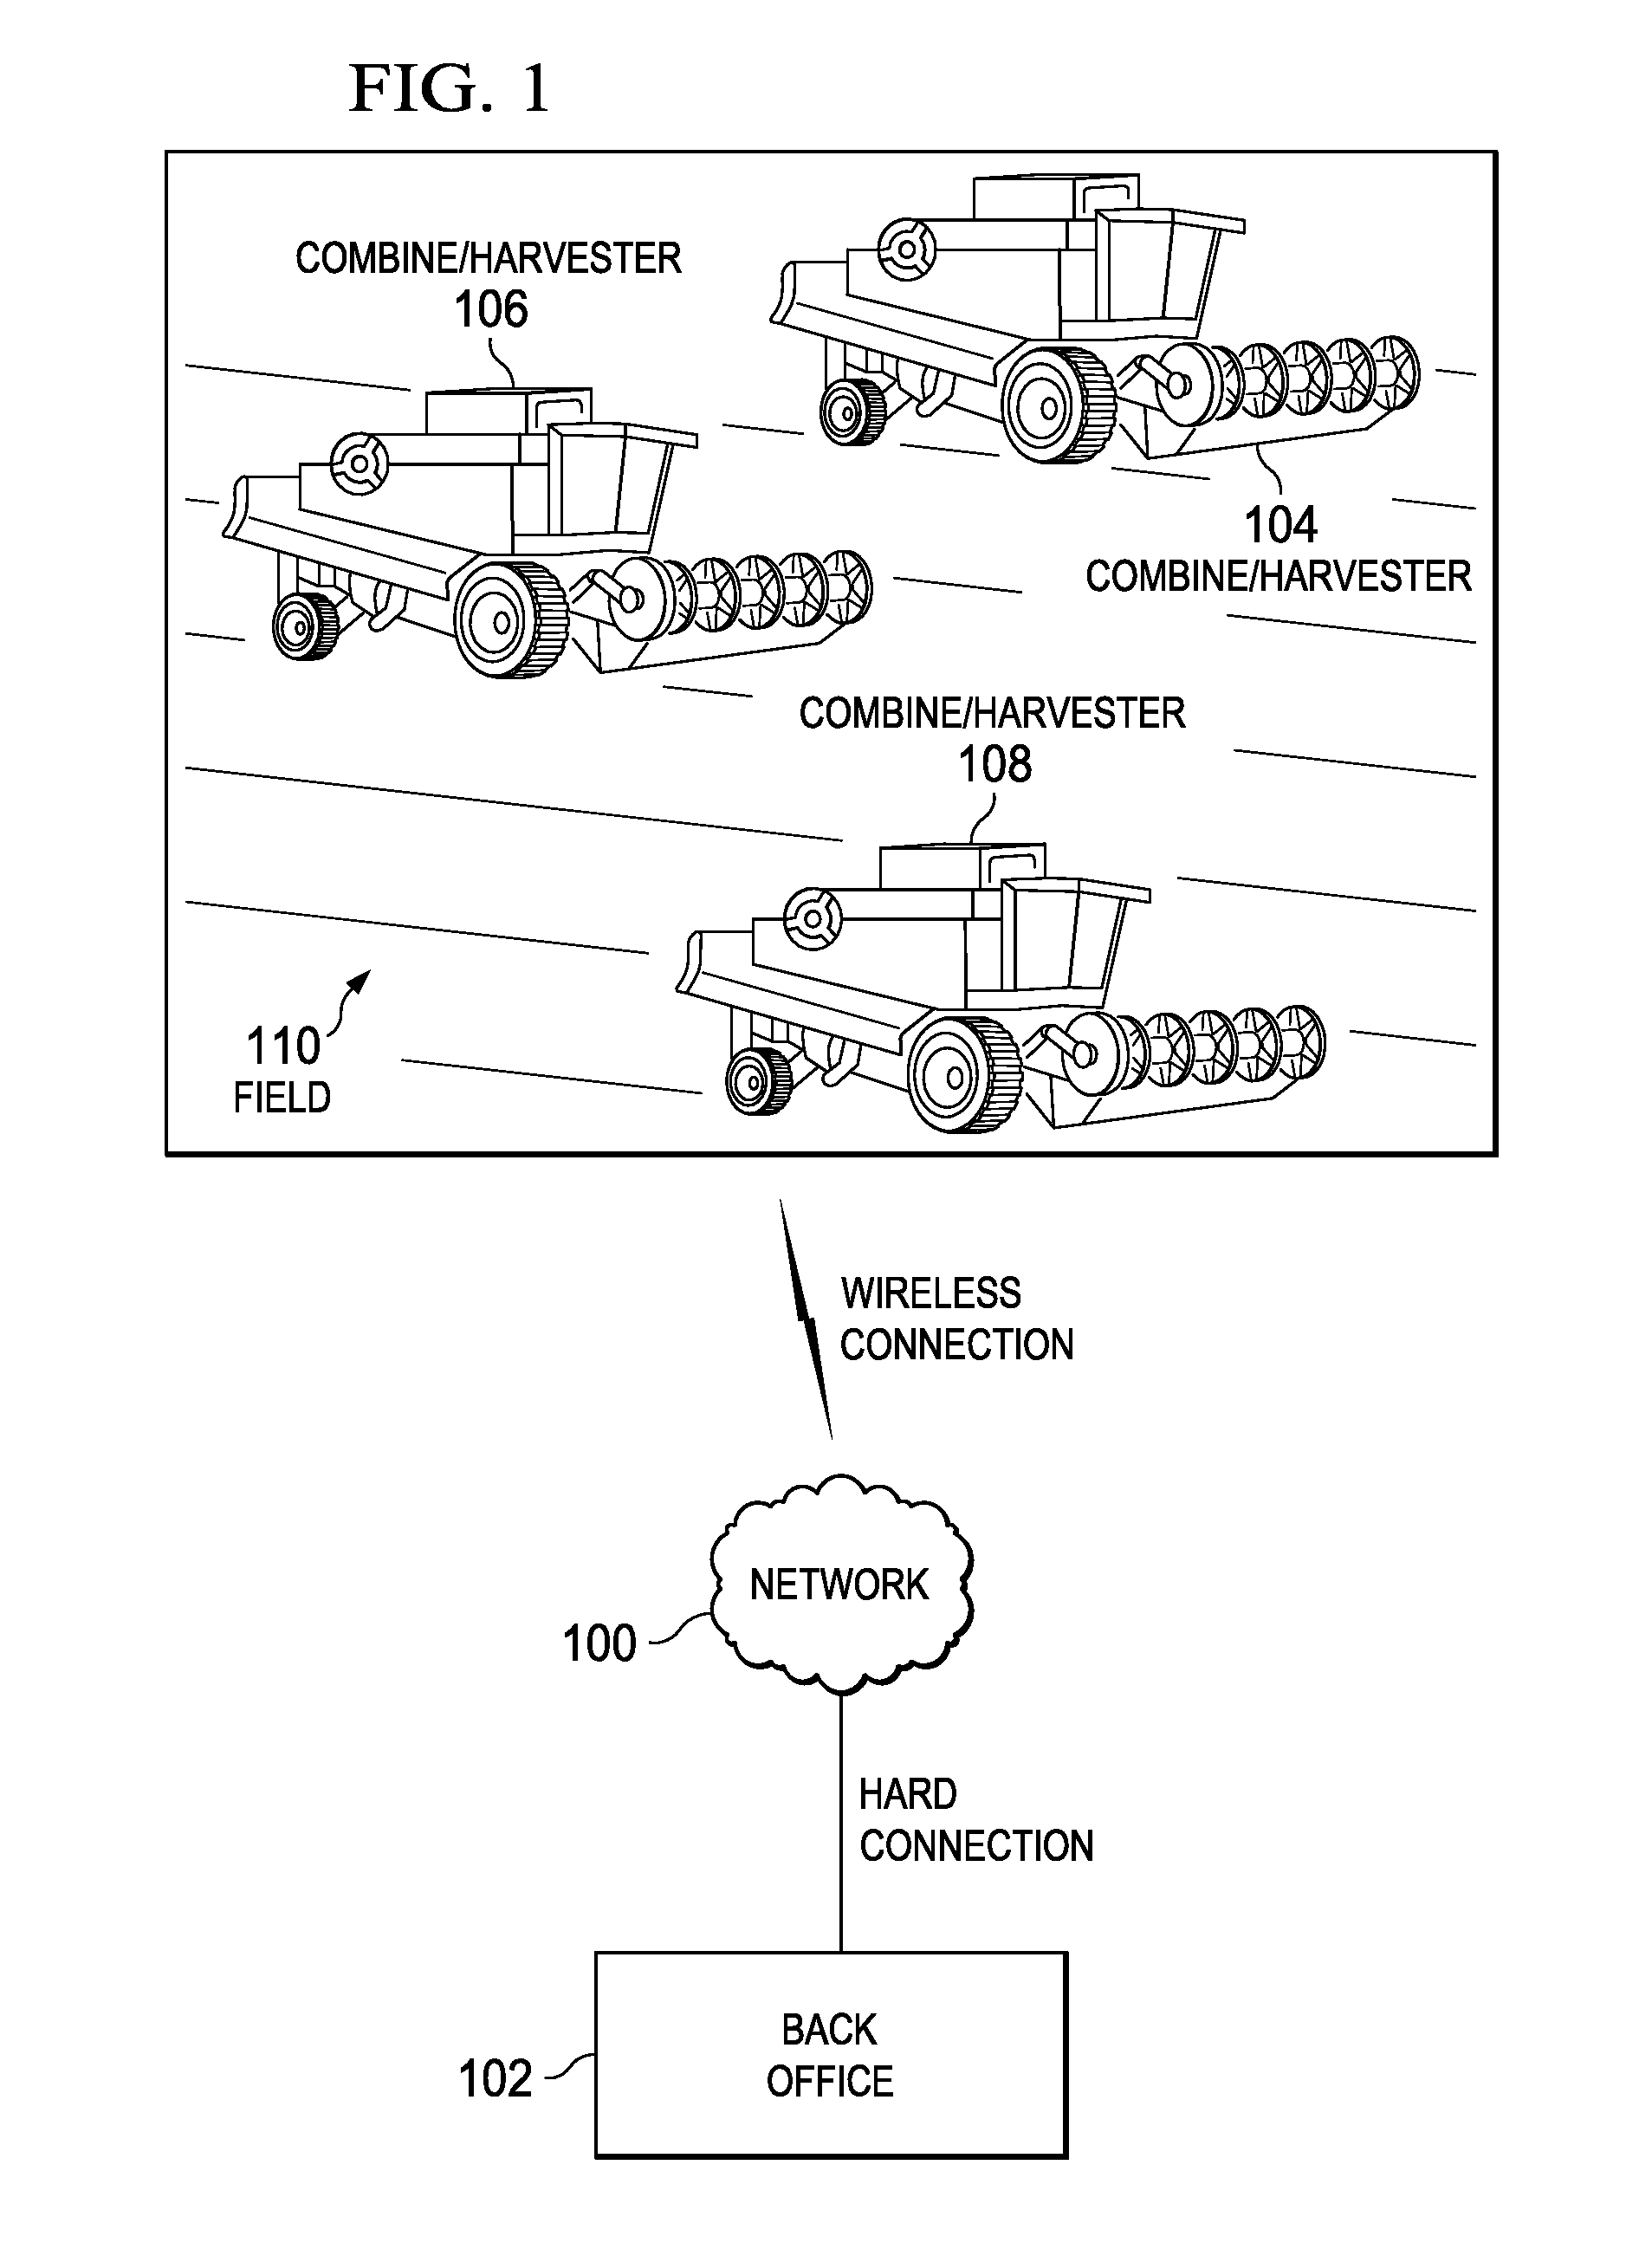 Method and apparatus for machine coordination which maintains line-of-site contact